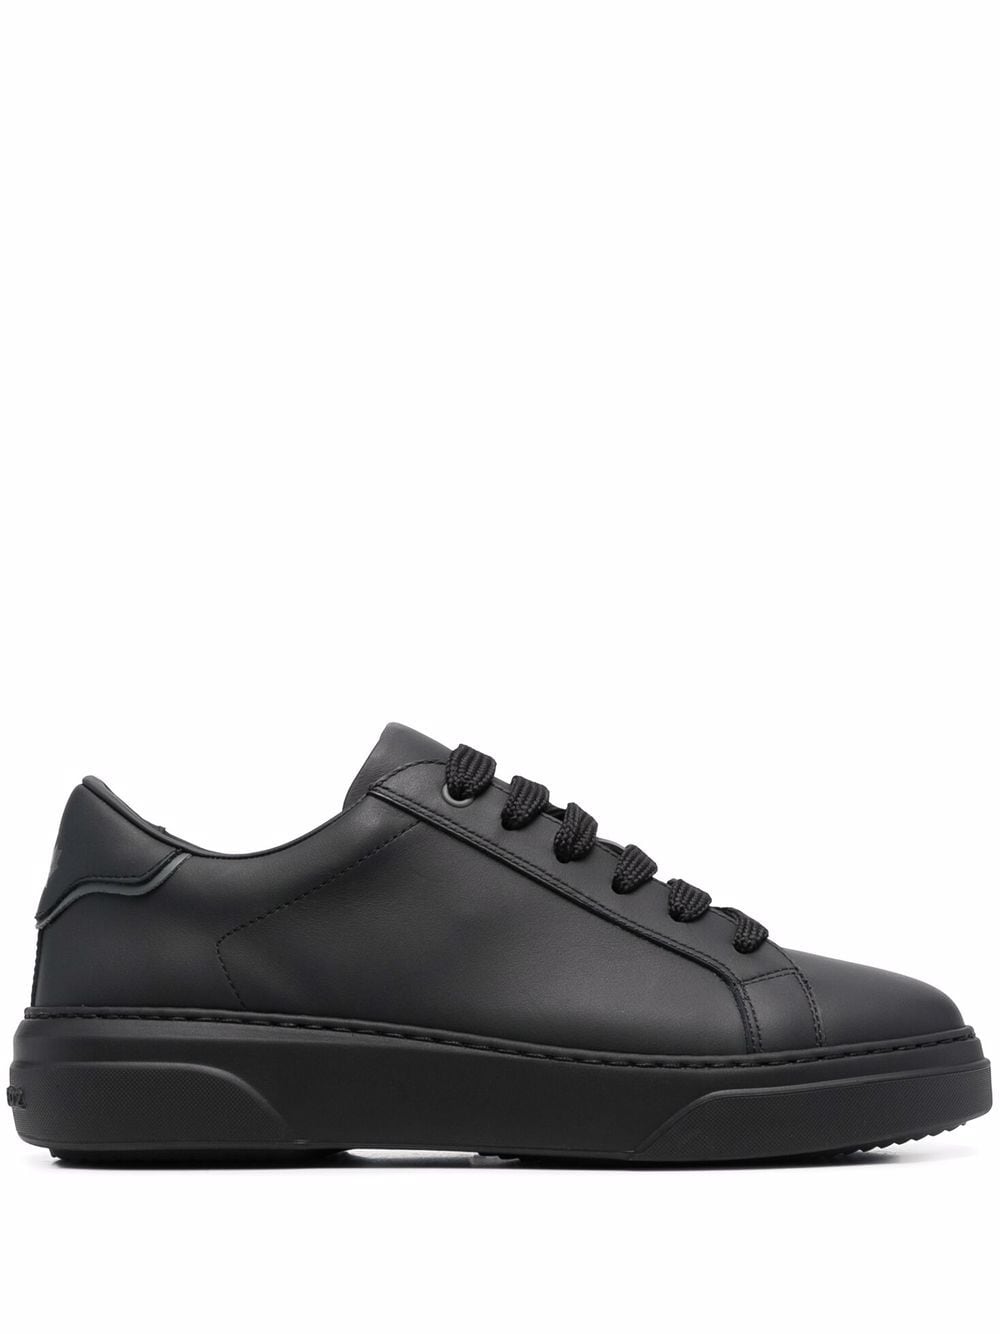 Dsquared2 low-top leather sneakers - Black von Dsquared2